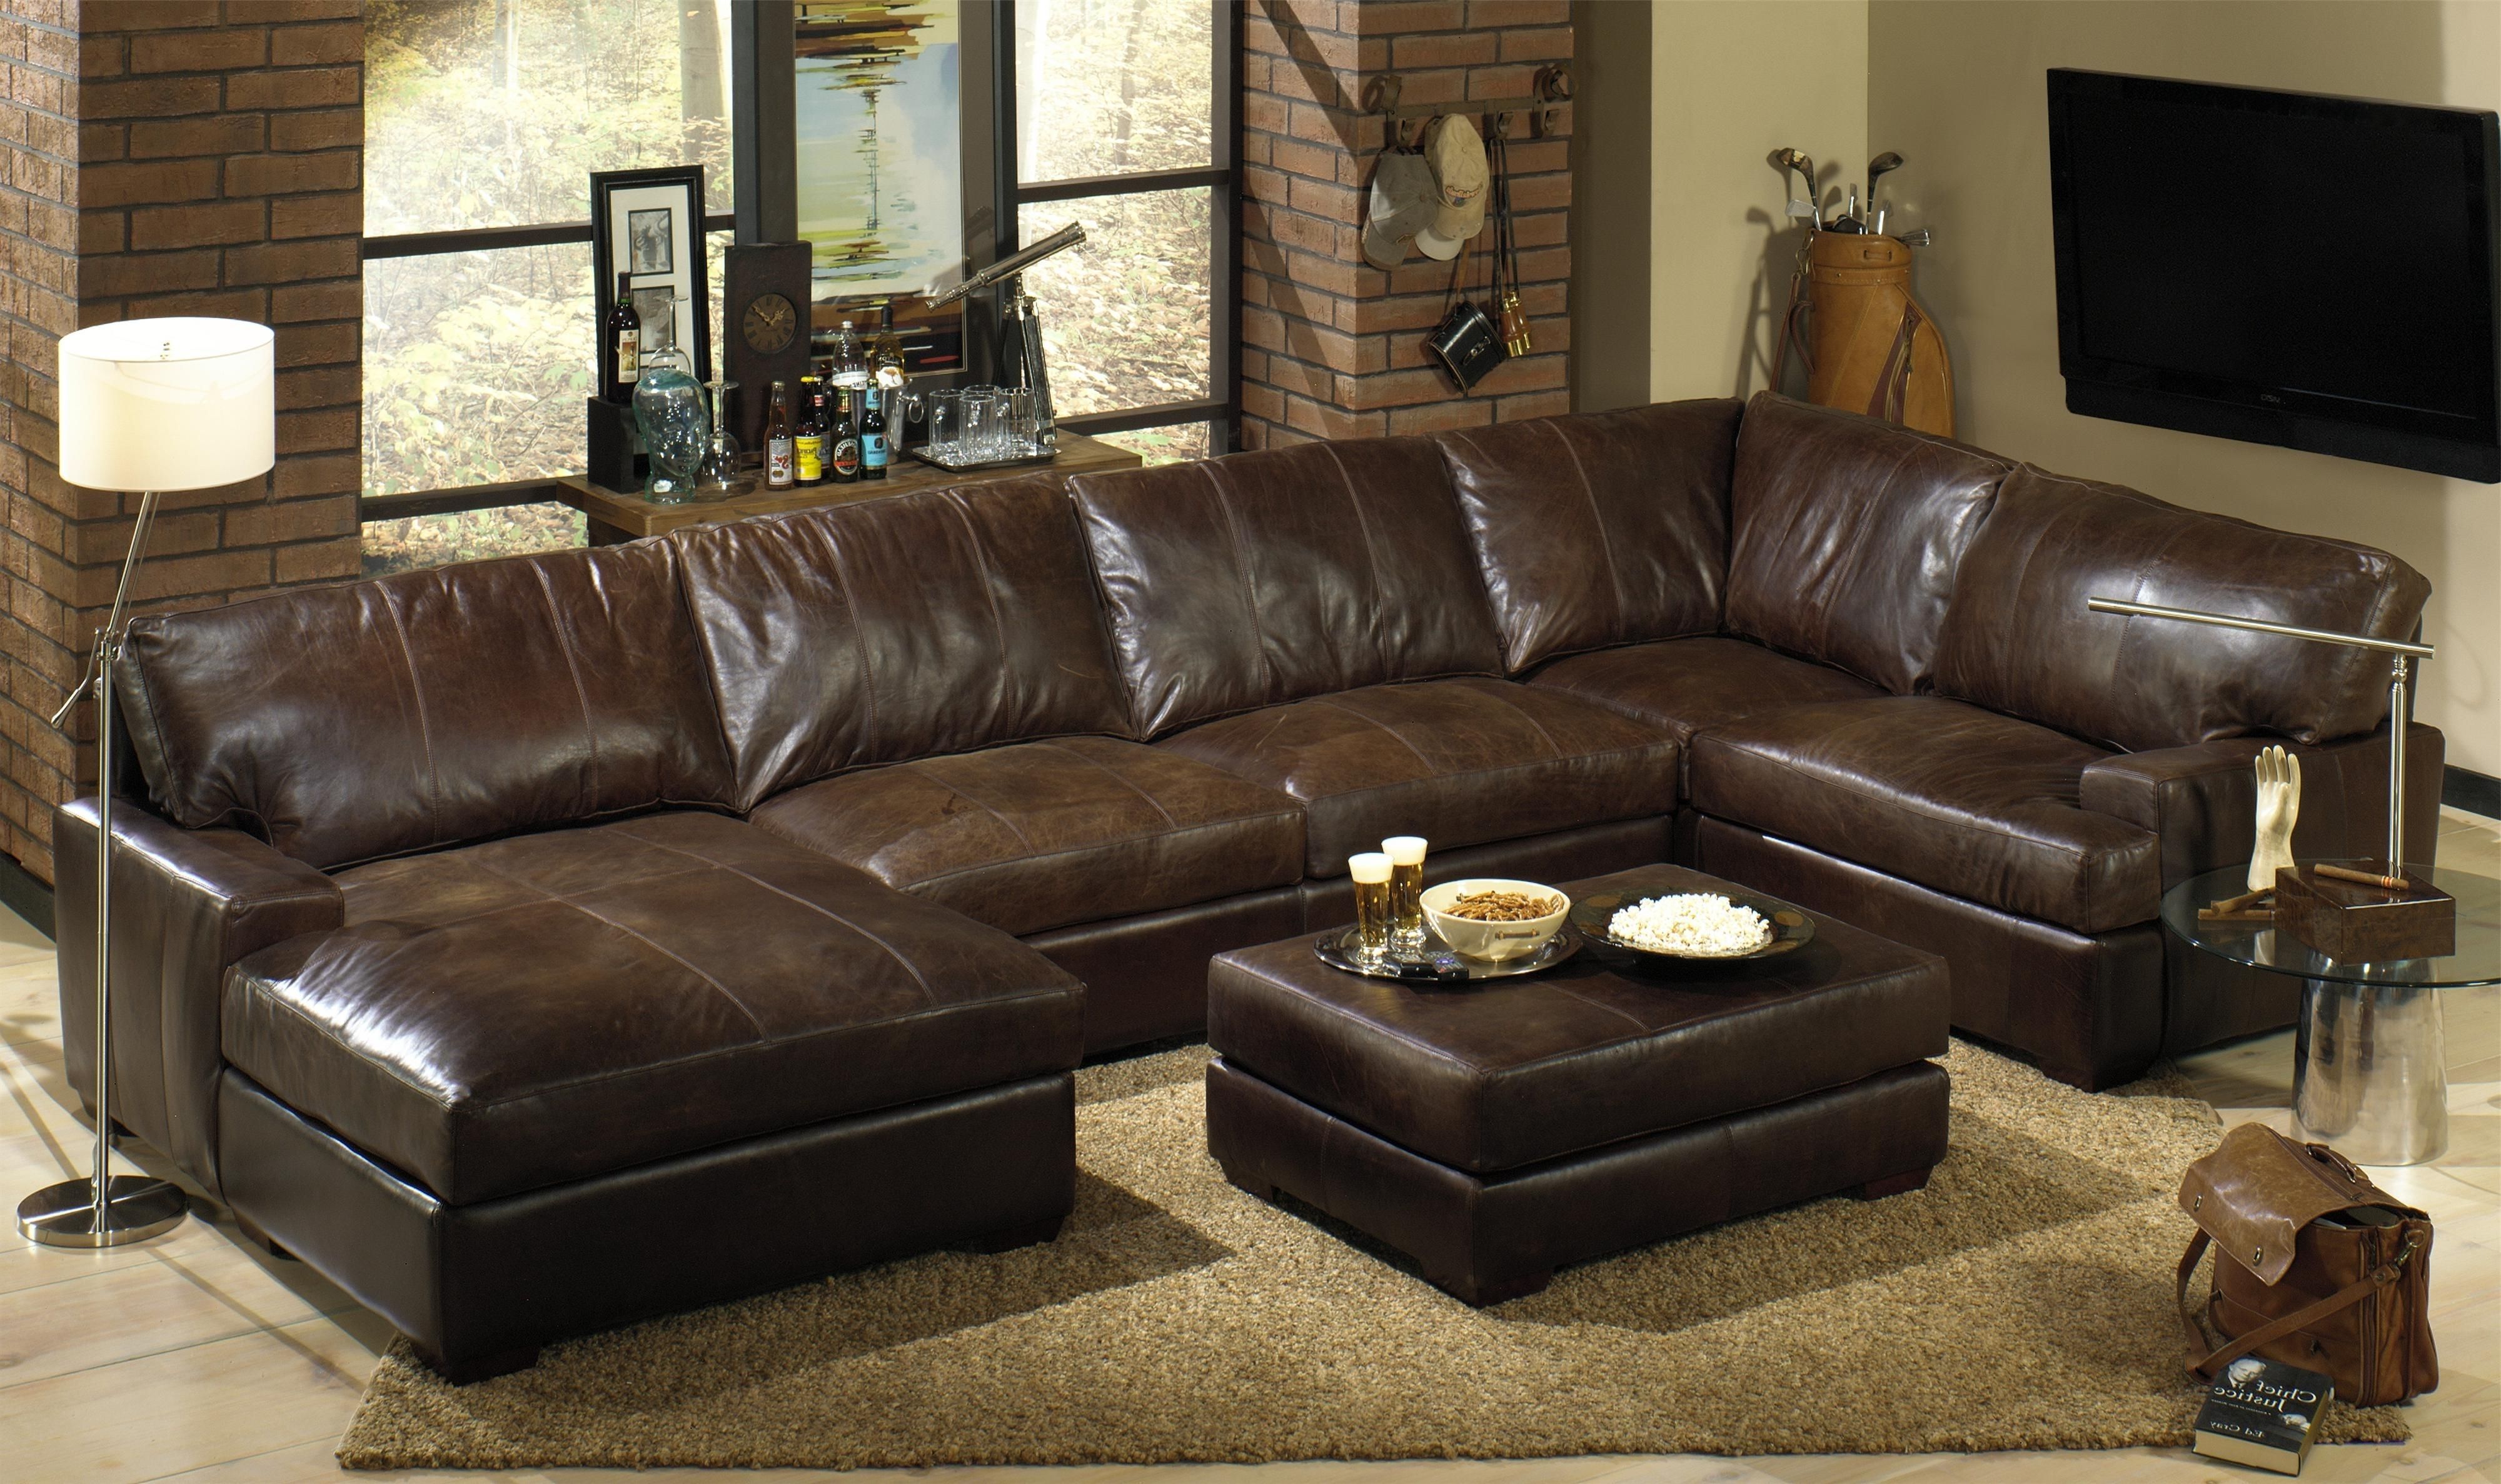 Comfortable Sectional Couches For Versatile Home Furniture Ideas In Most Up To Date High End Leather Sectional Sofas (View 2 of 15)